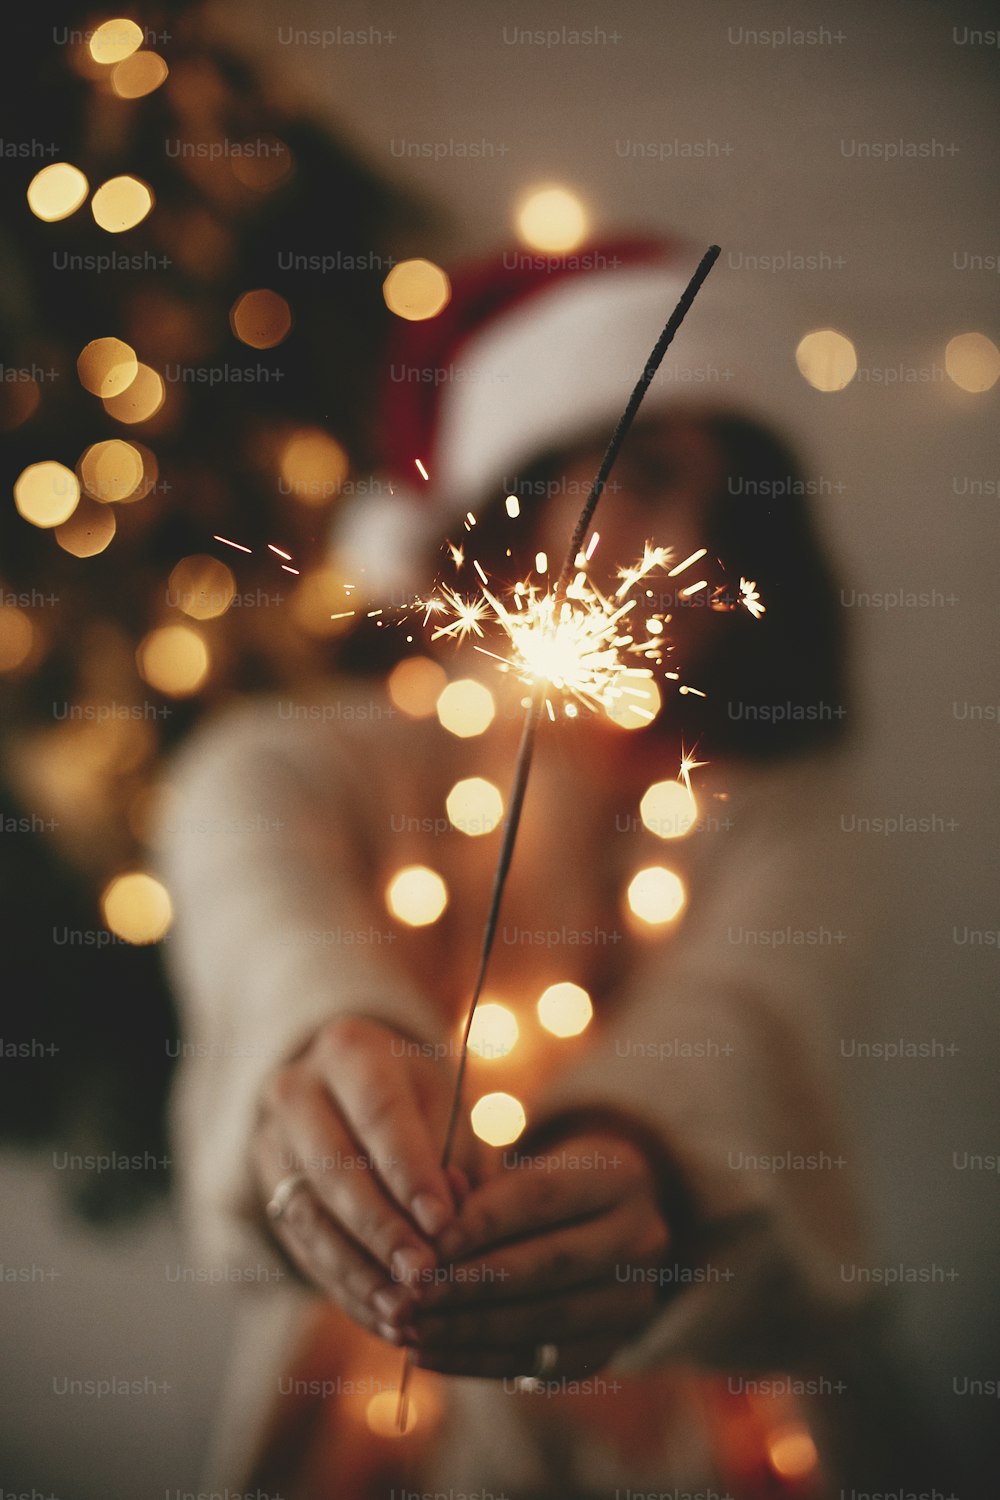 Happy New Year eve party atmosphere. Sparkler burning in hand of stylish girl in santa hat on background of modern christmas tree light in dark room. Woman with fireworks. Happy Holidays